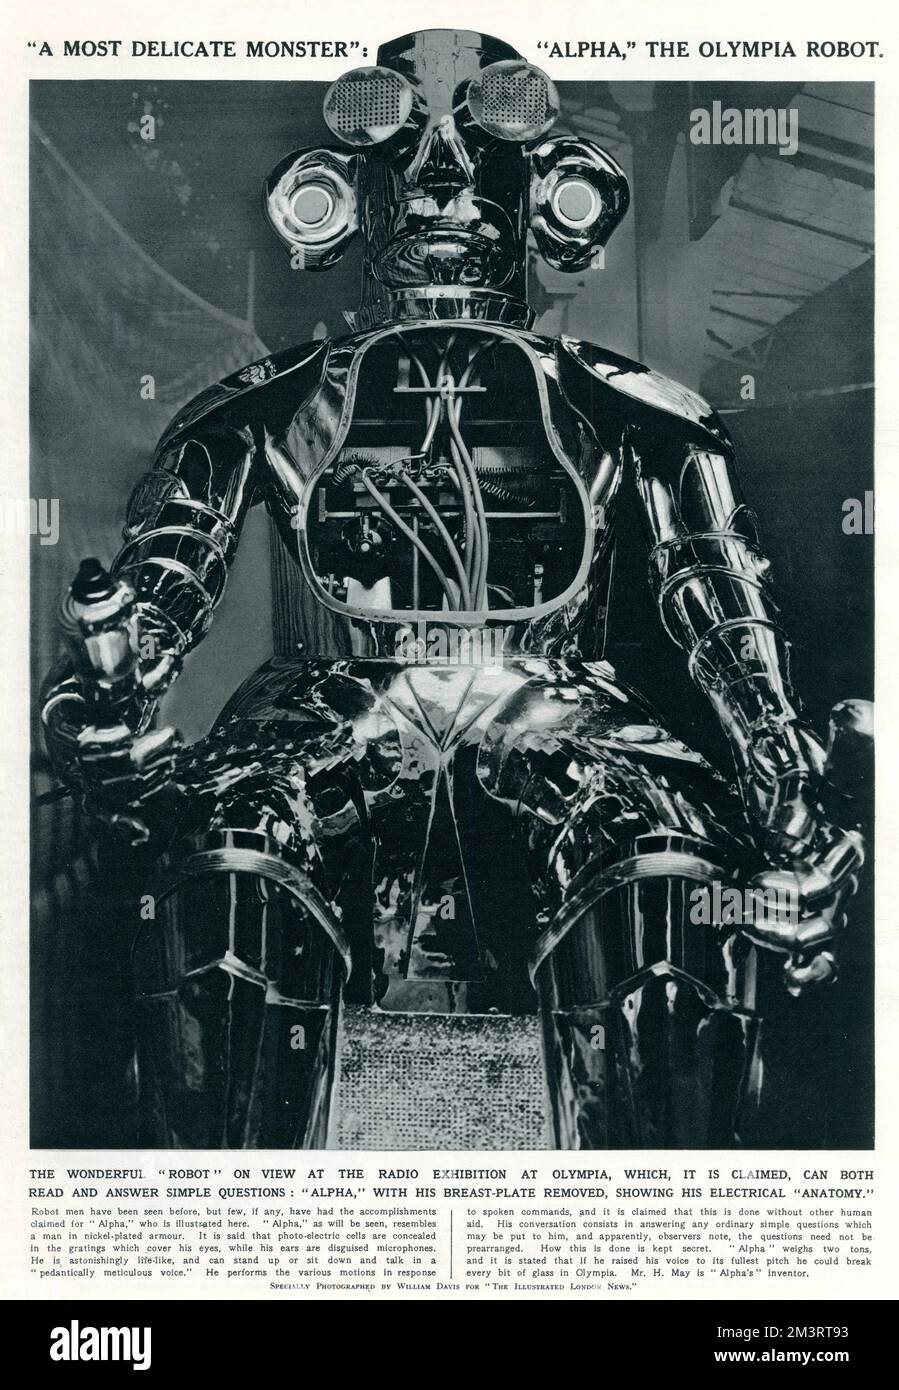 Nickel-plated armour 'Alpha', an electronic robot, designed by H. May, that could read and answer simple questions, being shown at the Olympia Exhibition.     Date: 1932 Stock Photo